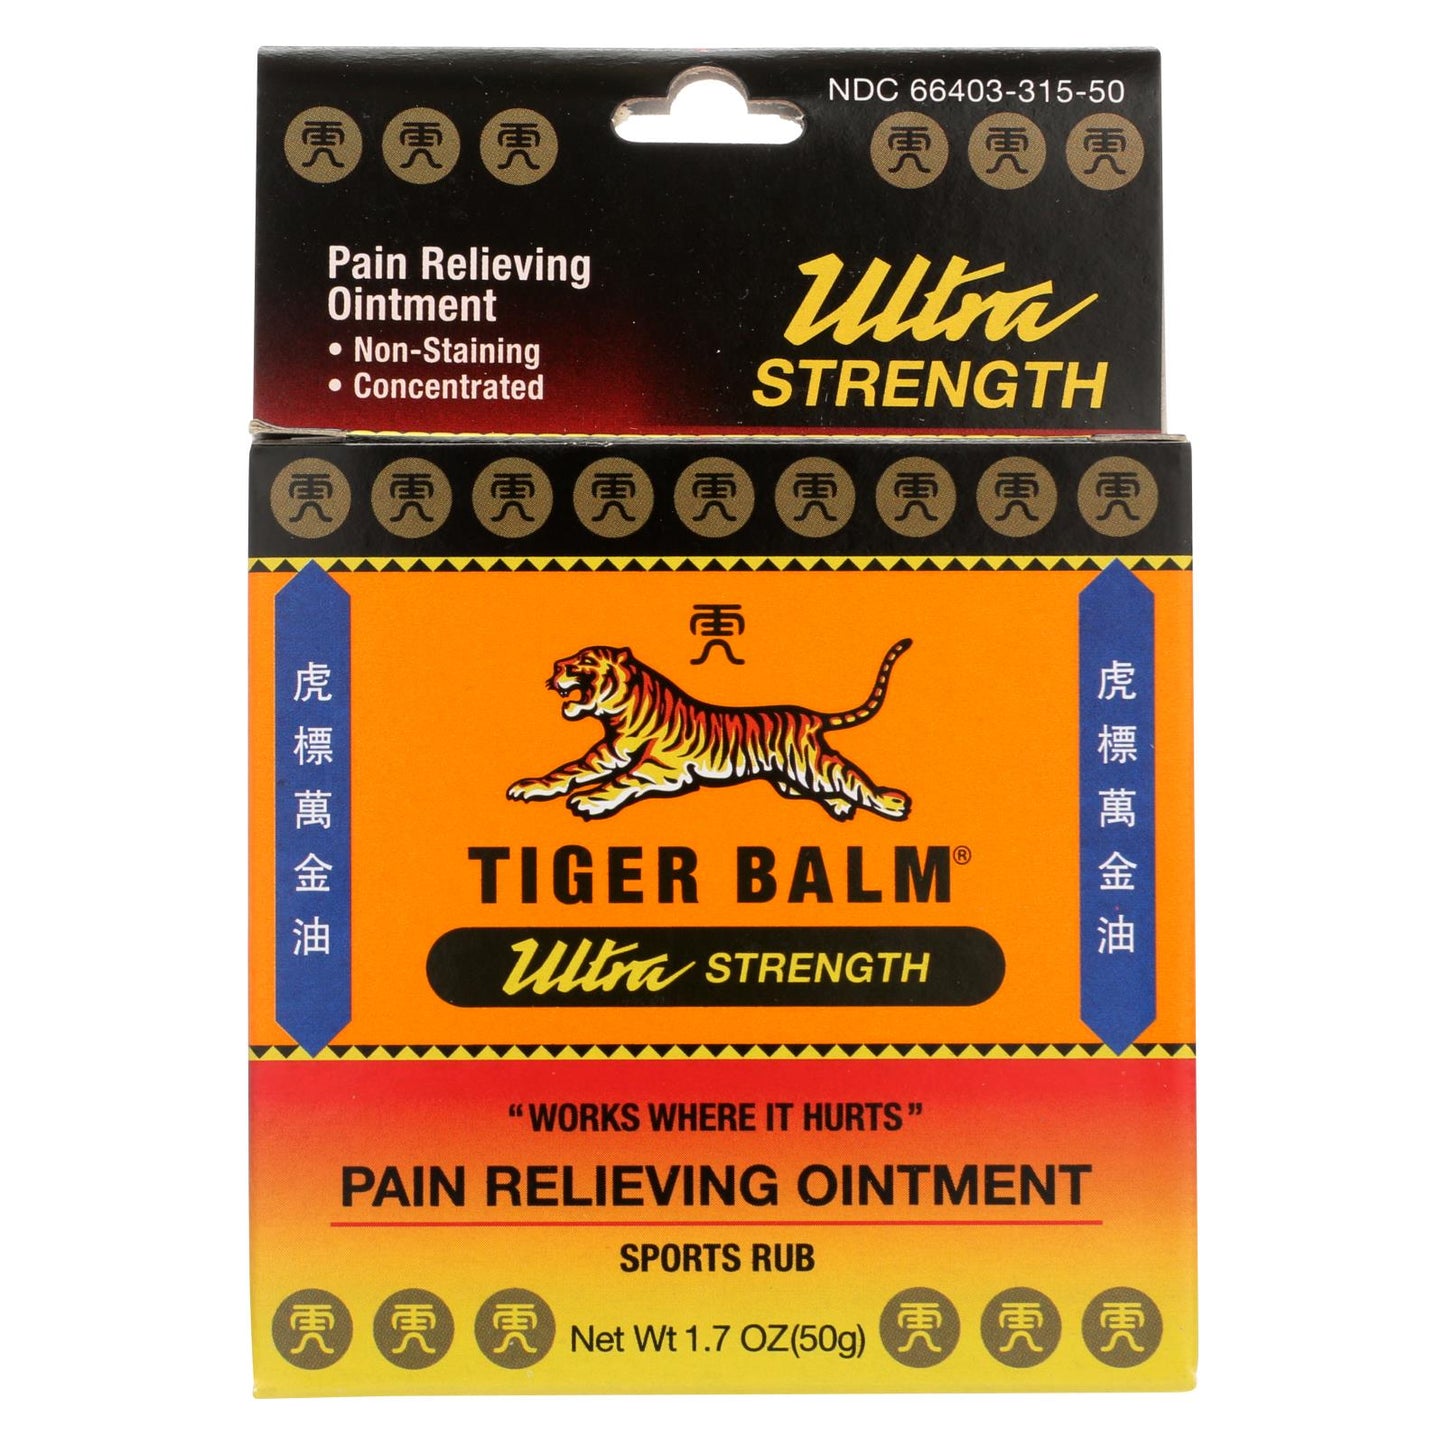 Tiger Balm Pain Relieving Ointment, Ultra Strength, Non-staining, 1.7 Oz